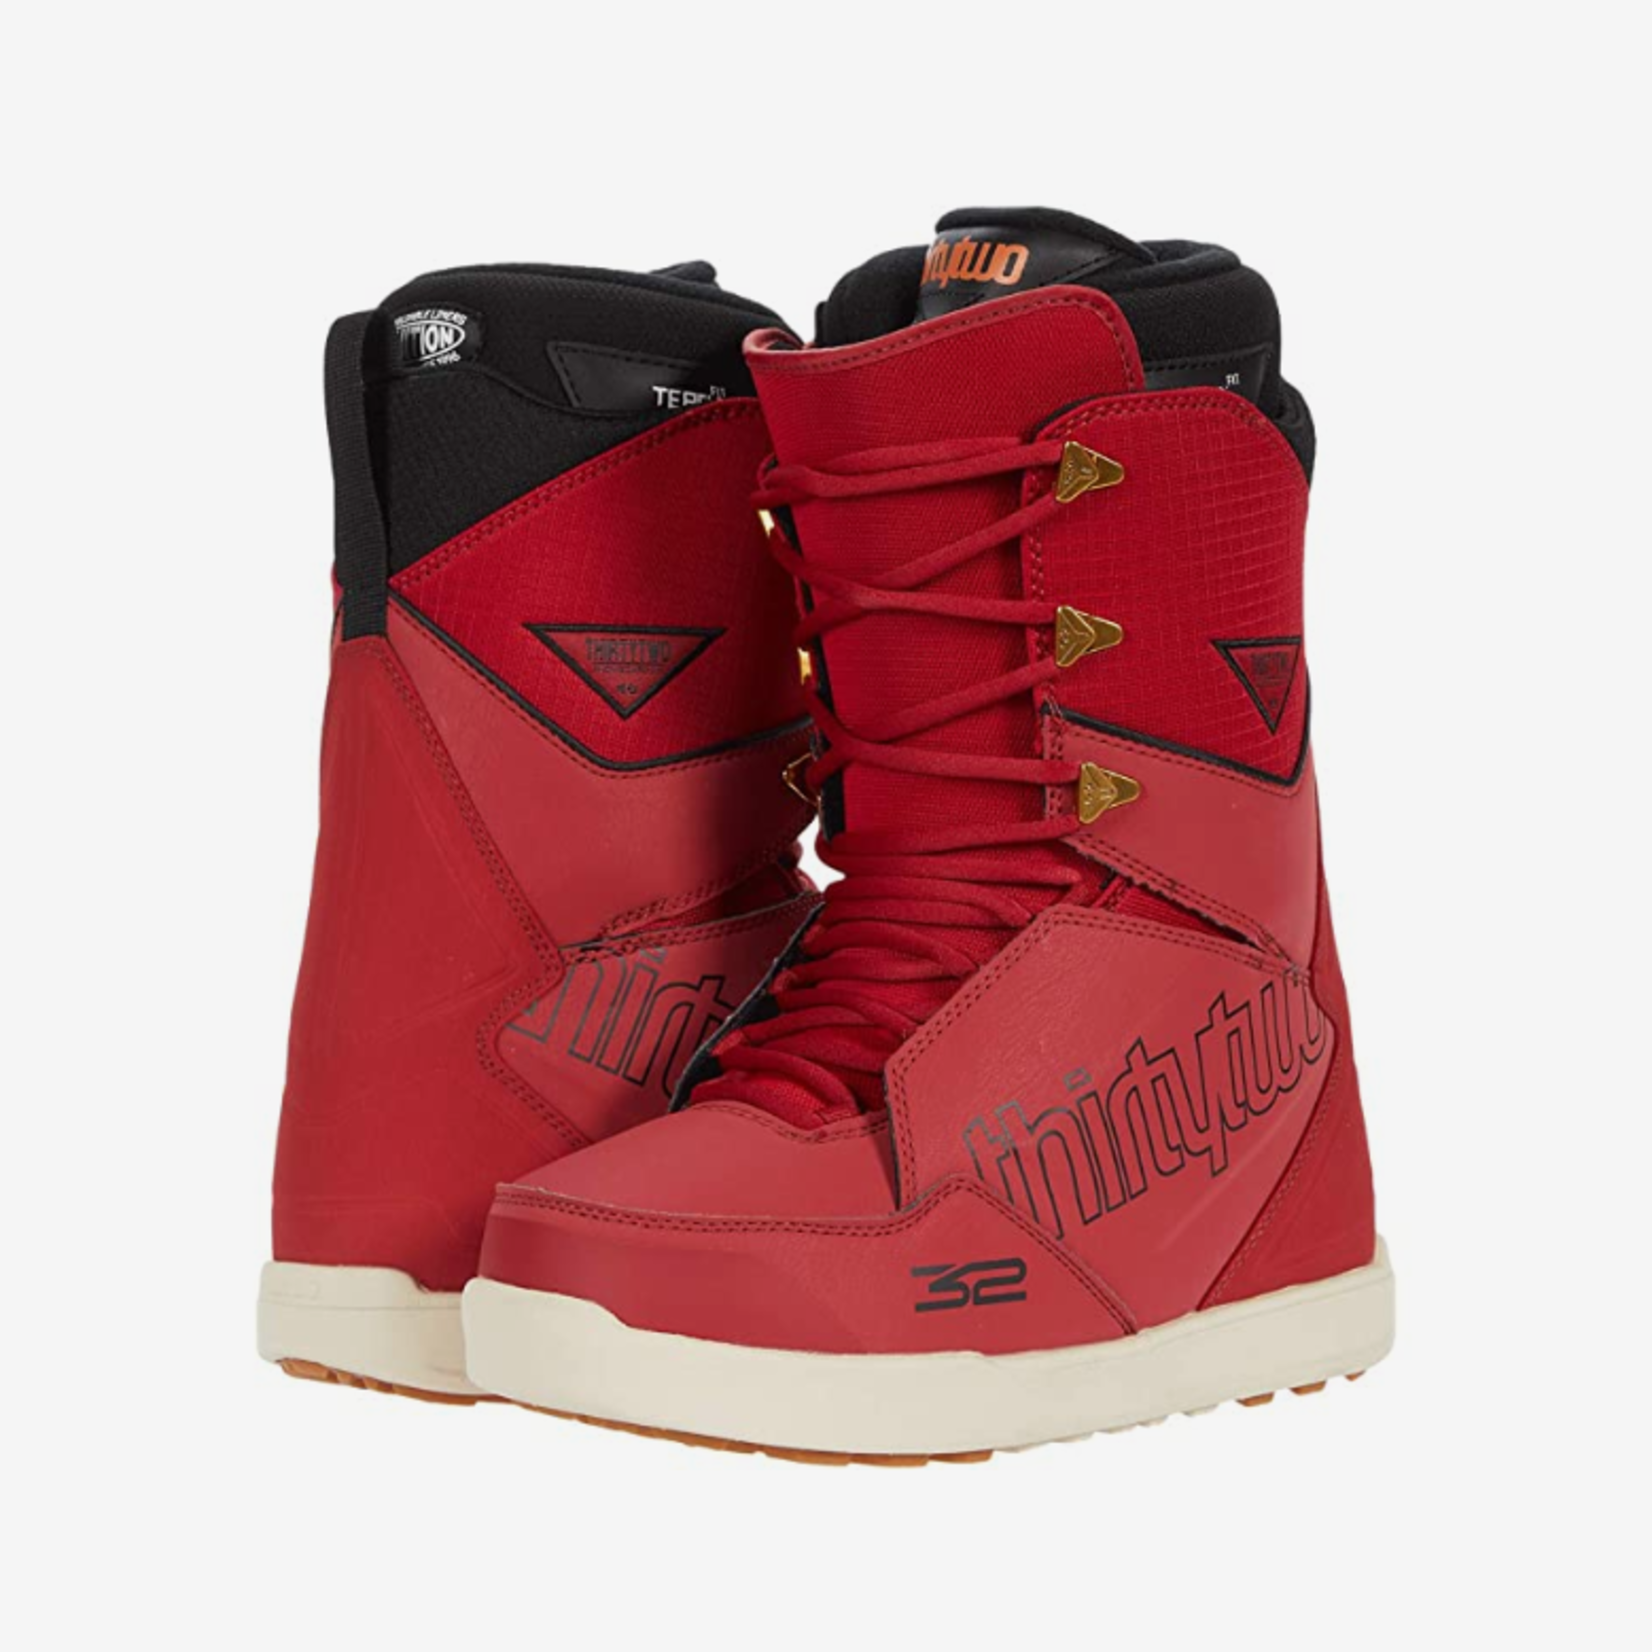 THIRTY TWO MEN'S THIRTYTWO LASHED SNOWBOARD BOOTS - SALE